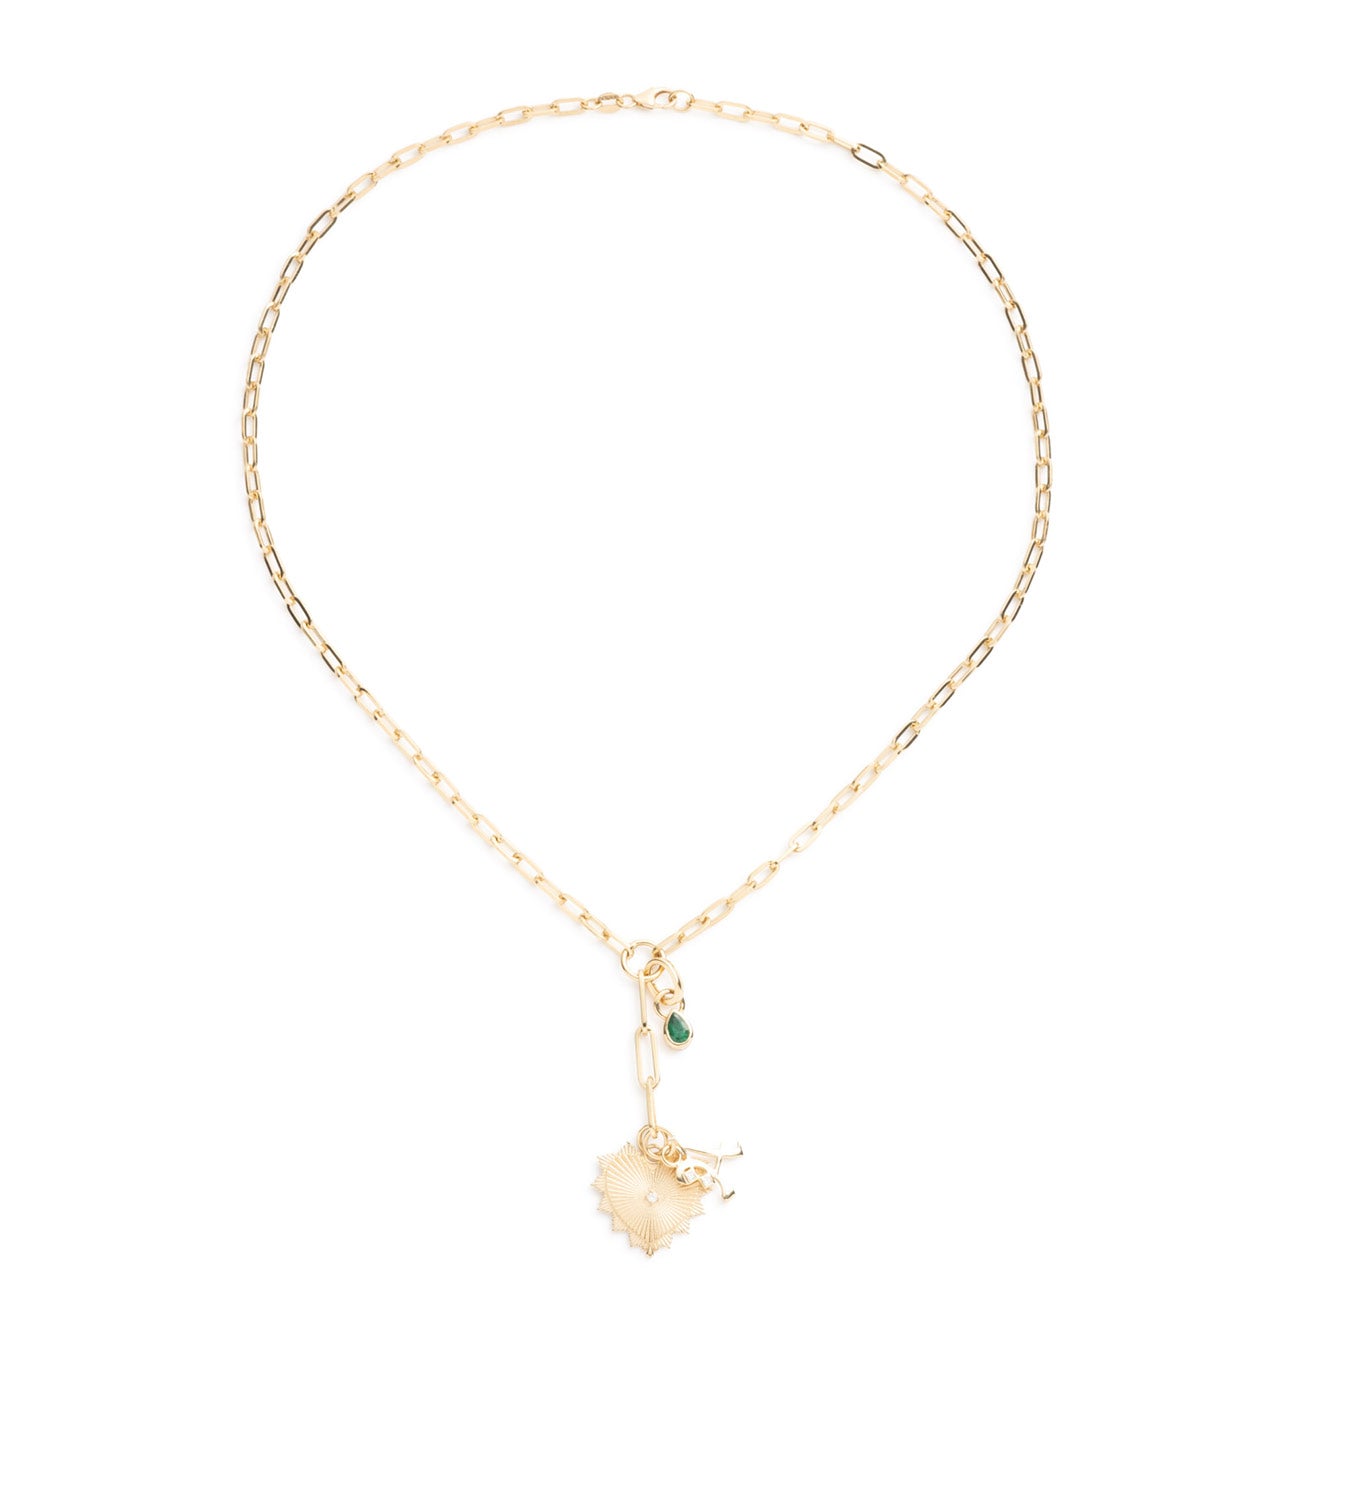 Radiating Heart, Initial & Pear : Refined Clip Extension Necklace